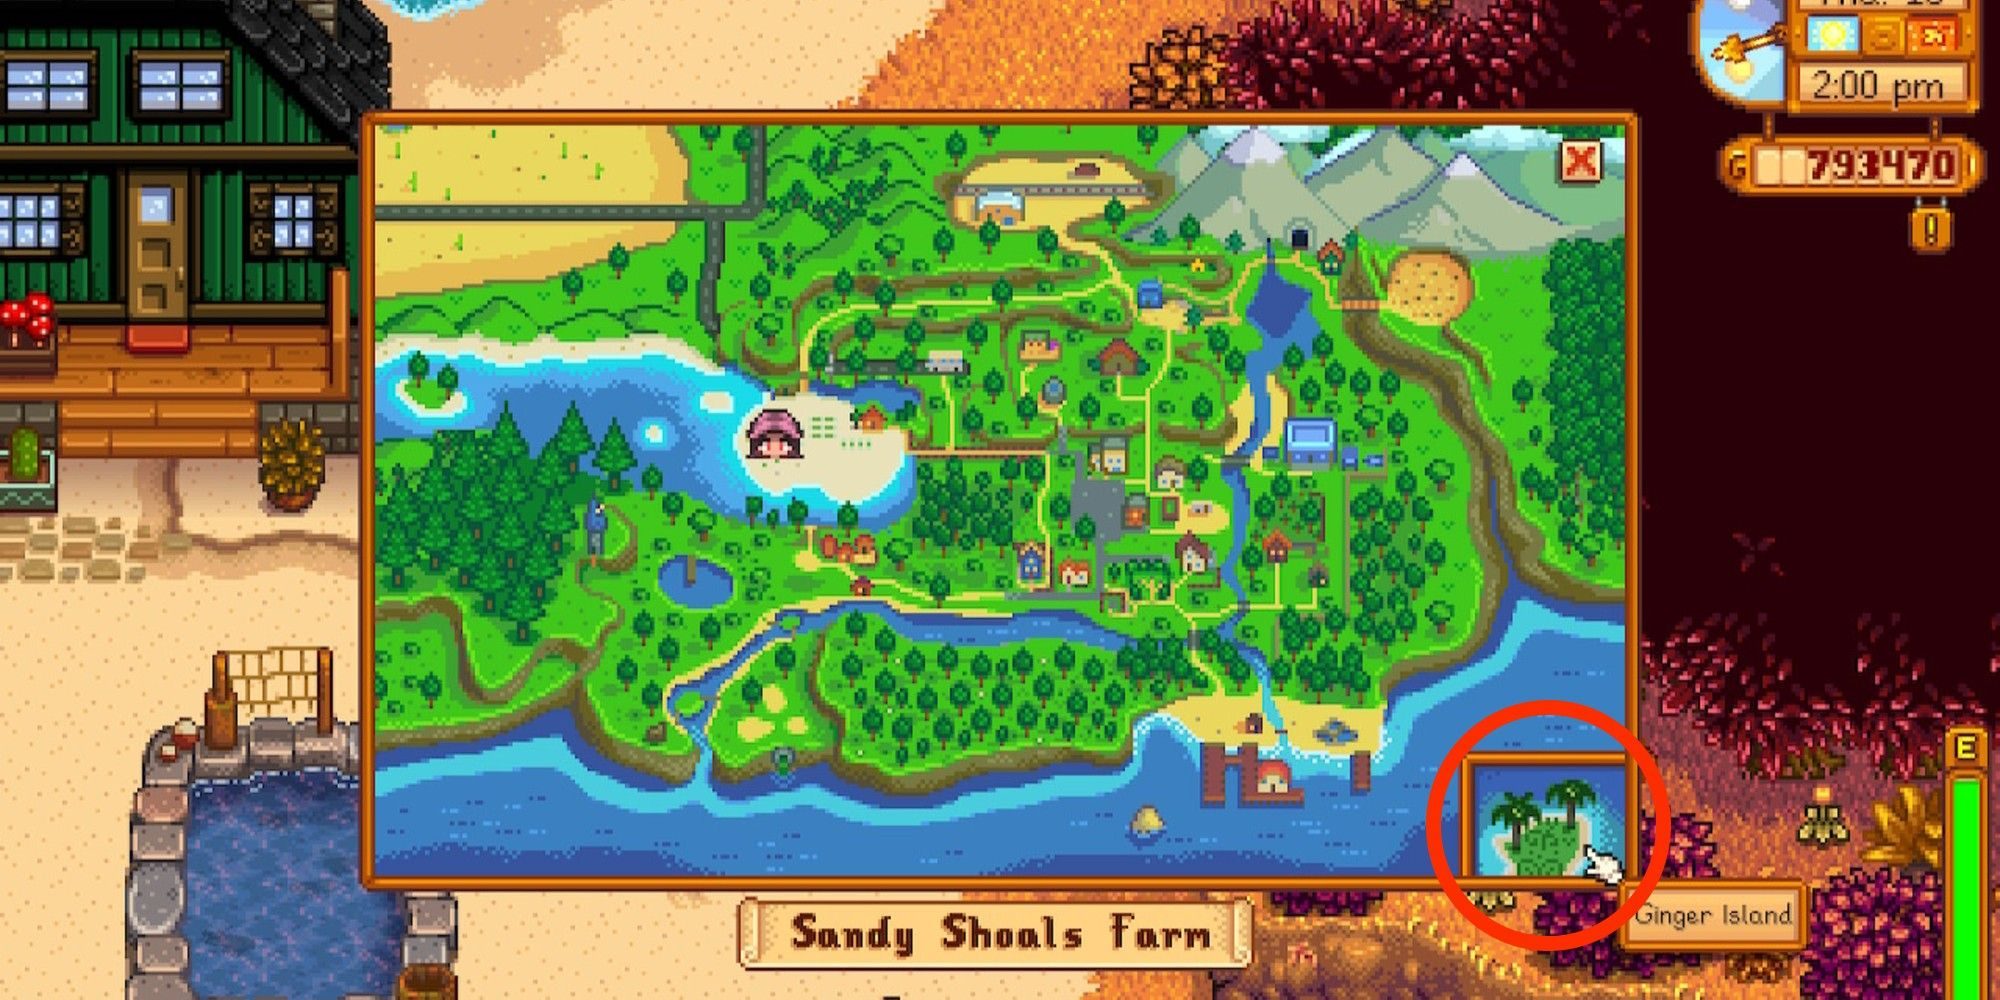 stardew-valley-map-with-ginger-island-circled-6212034